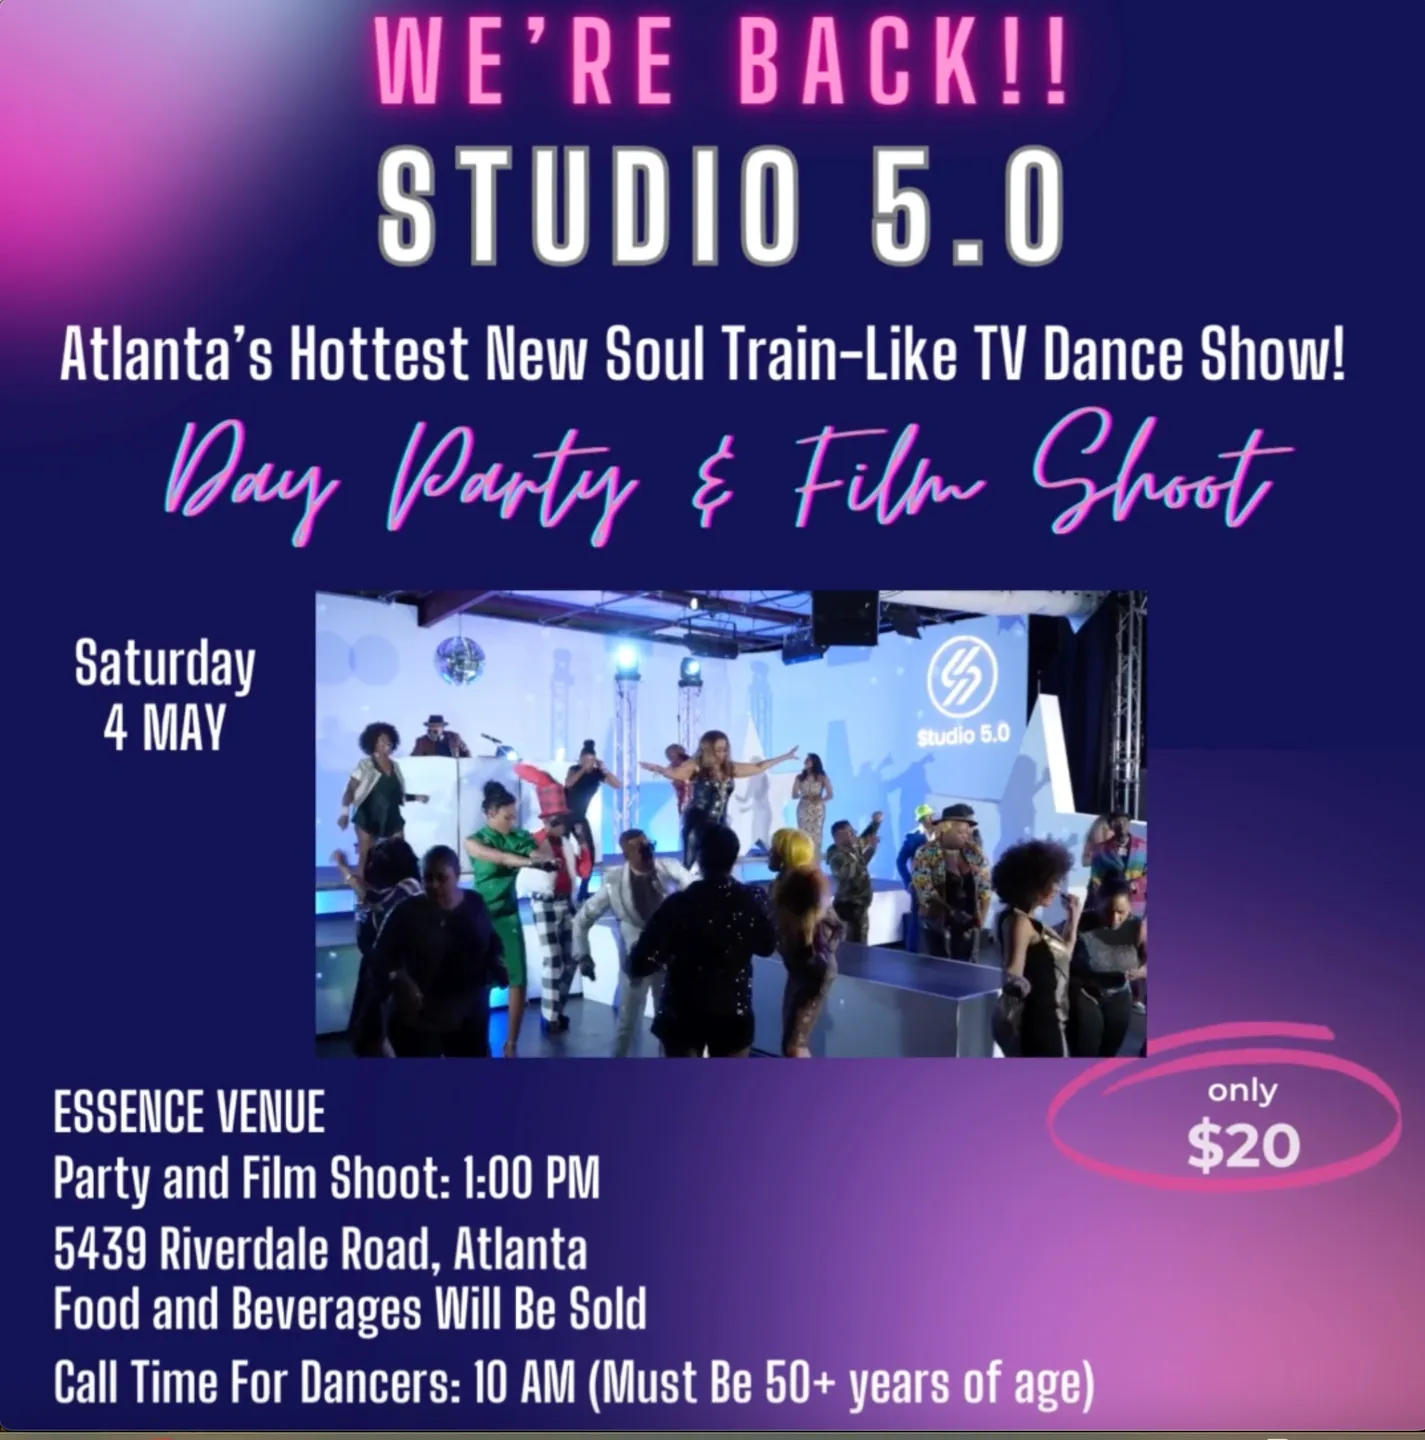 A poster for the event with people dancing.